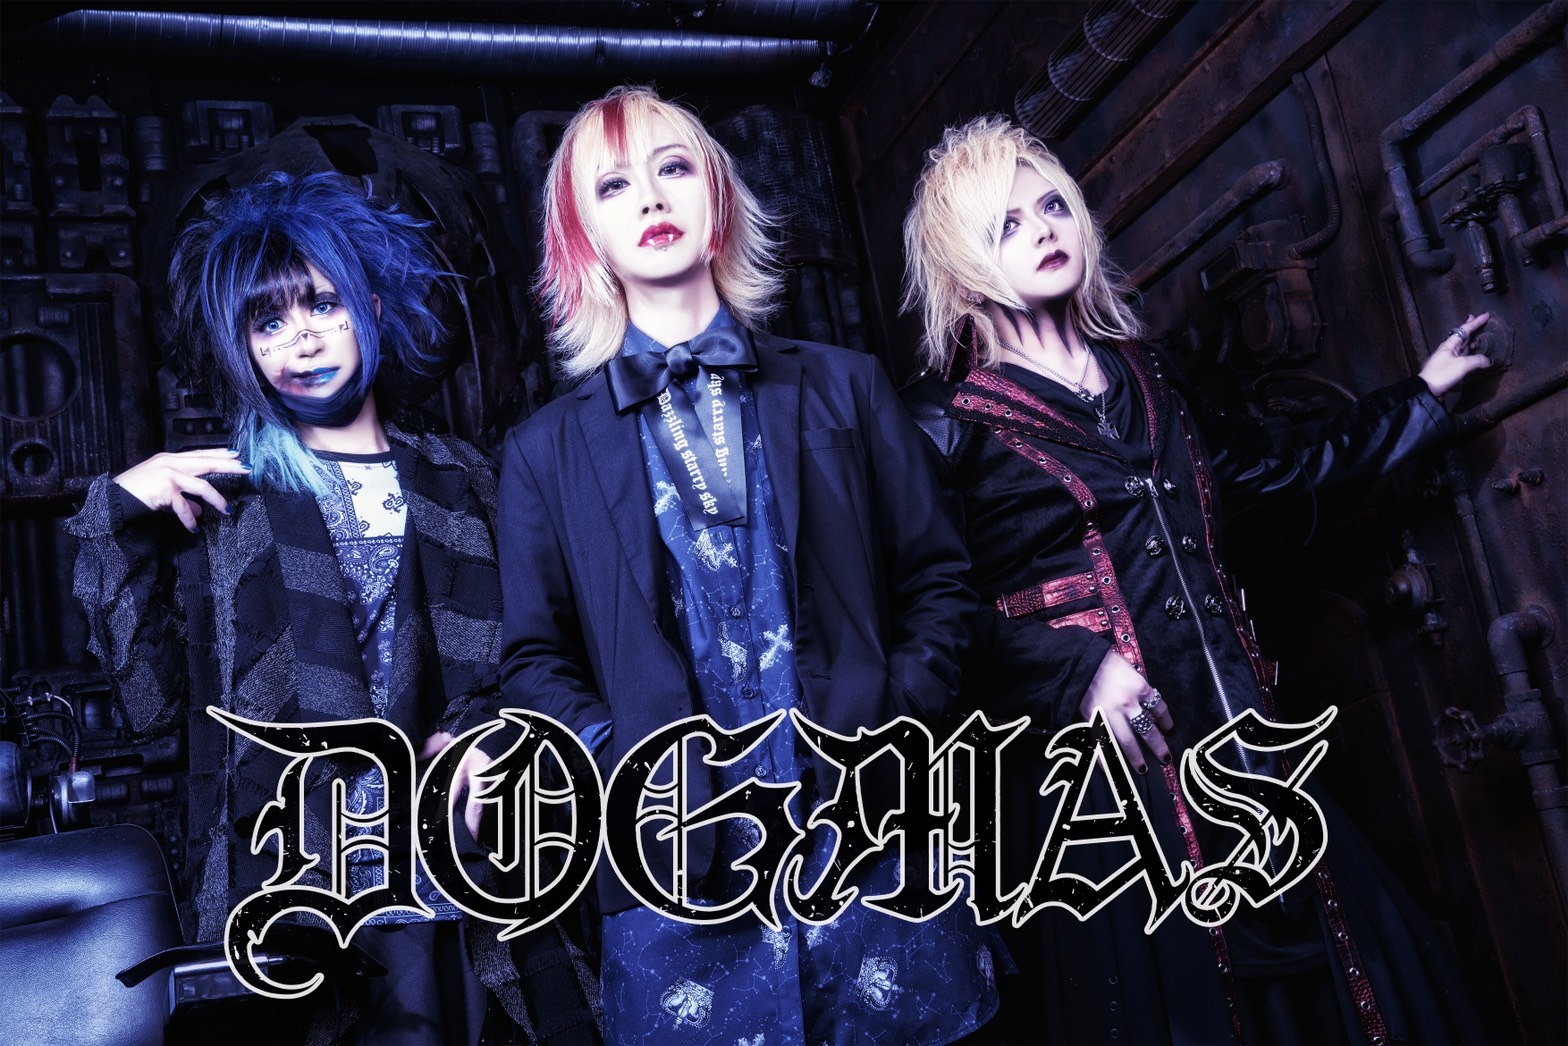 New band: DOGMAS + 1st release